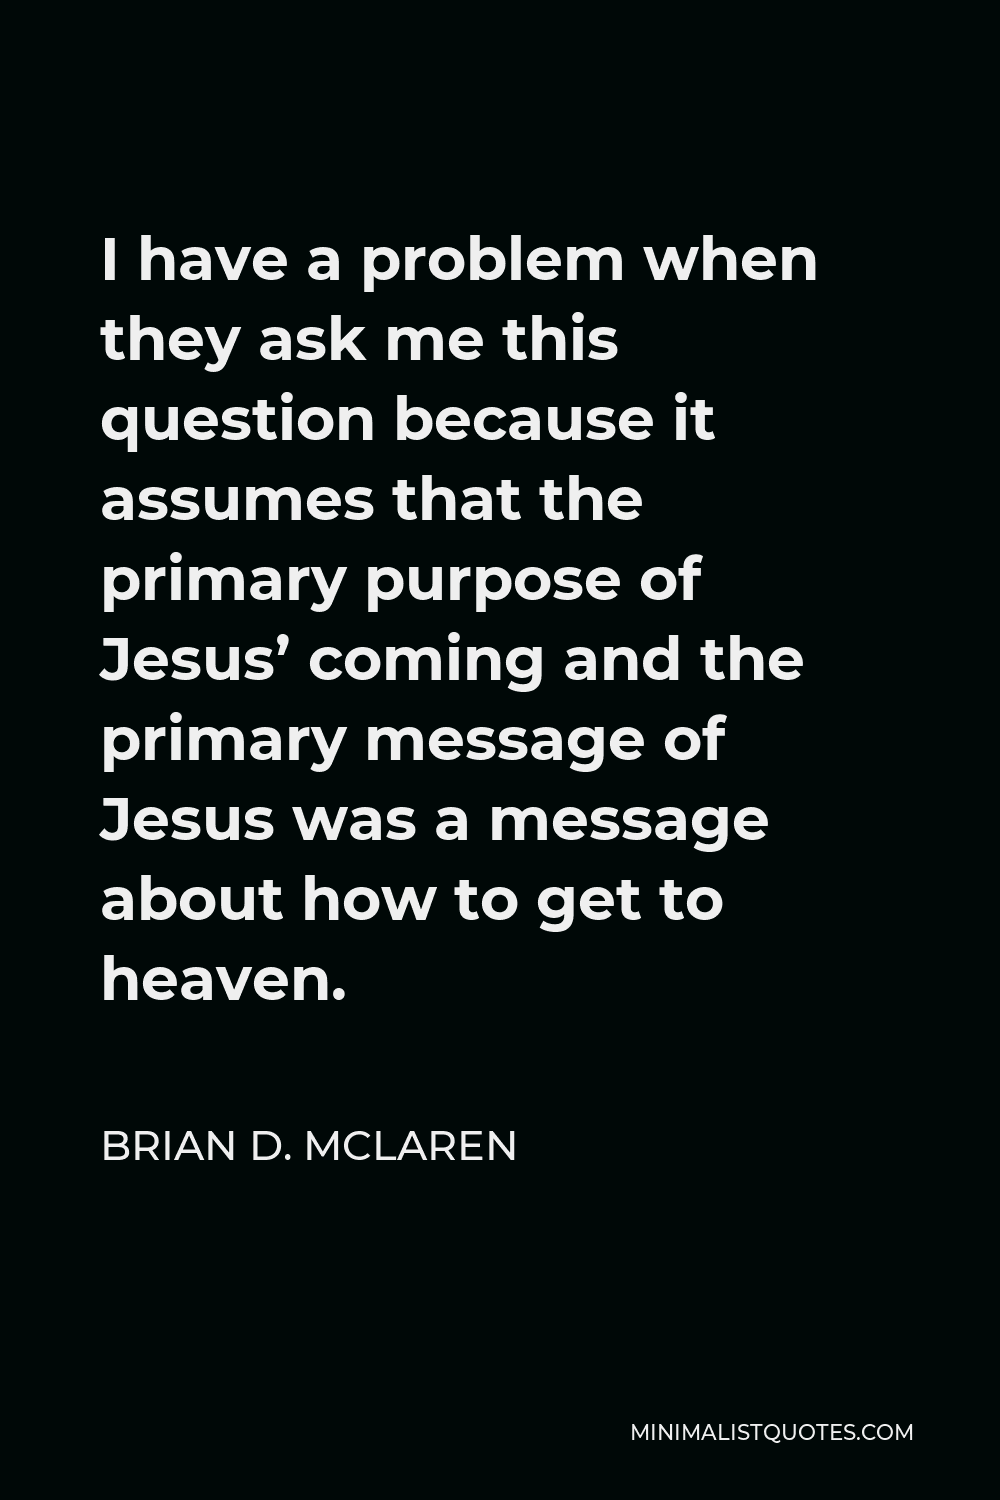 Brian D. McLaren Quote - I have a problem when they ask me this question because it assumes that the primary purpose of Jesus’ coming and the primary message of Jesus was a message about how to get to heaven.